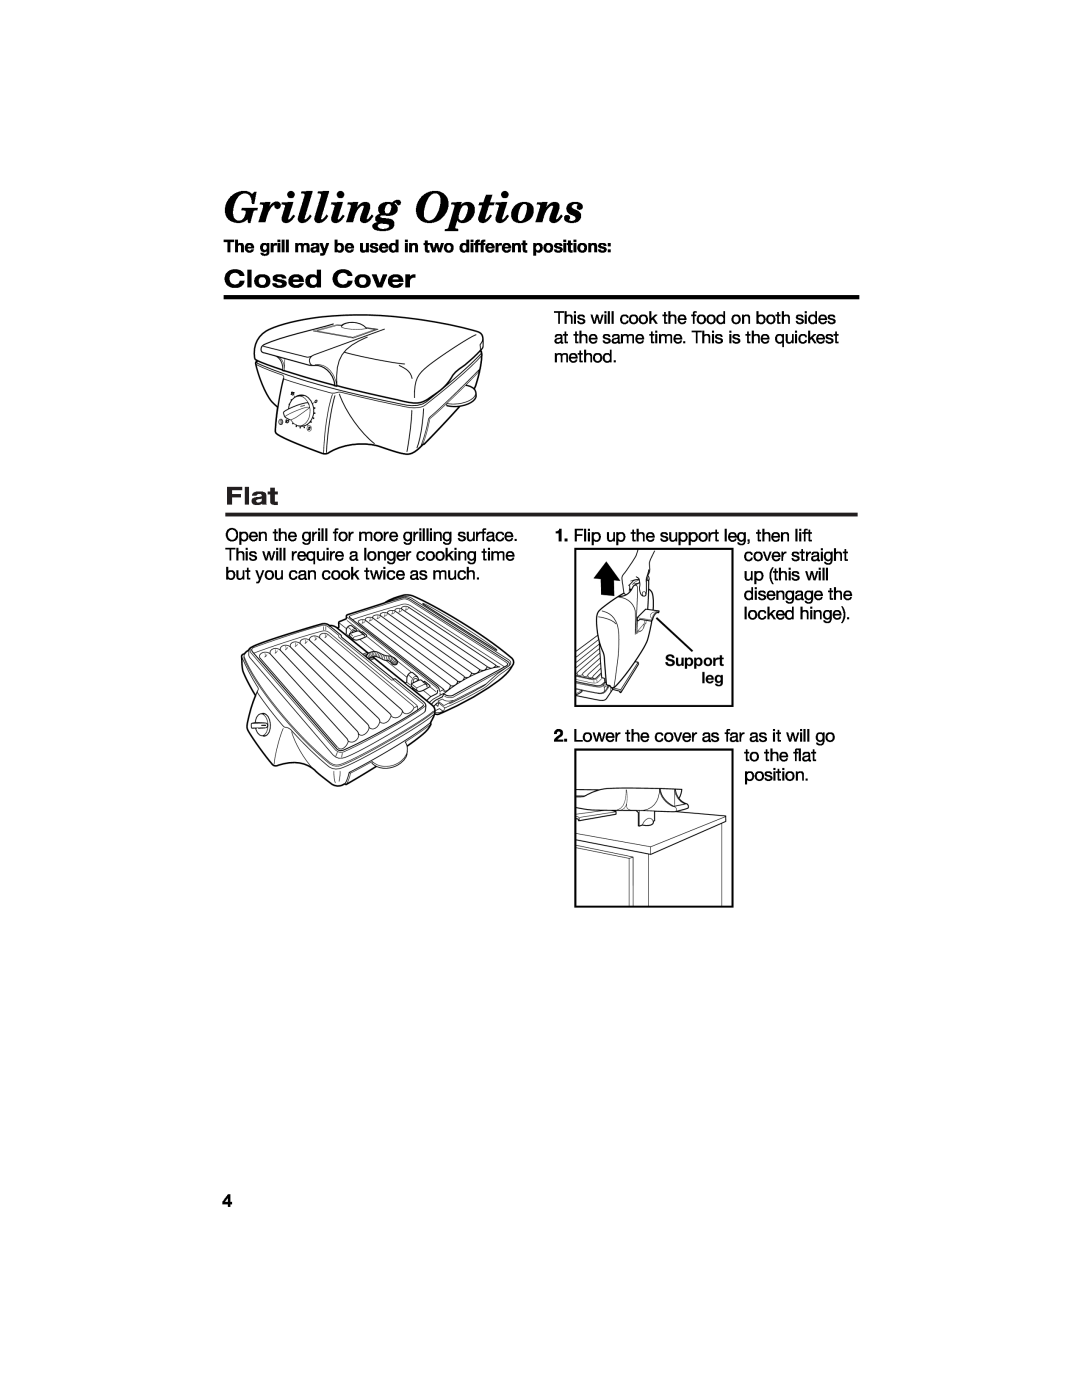 Hamilton Beach 840135600 manual Grilling Options, Closed Cover, Flat, The grill may be used in two different positions 